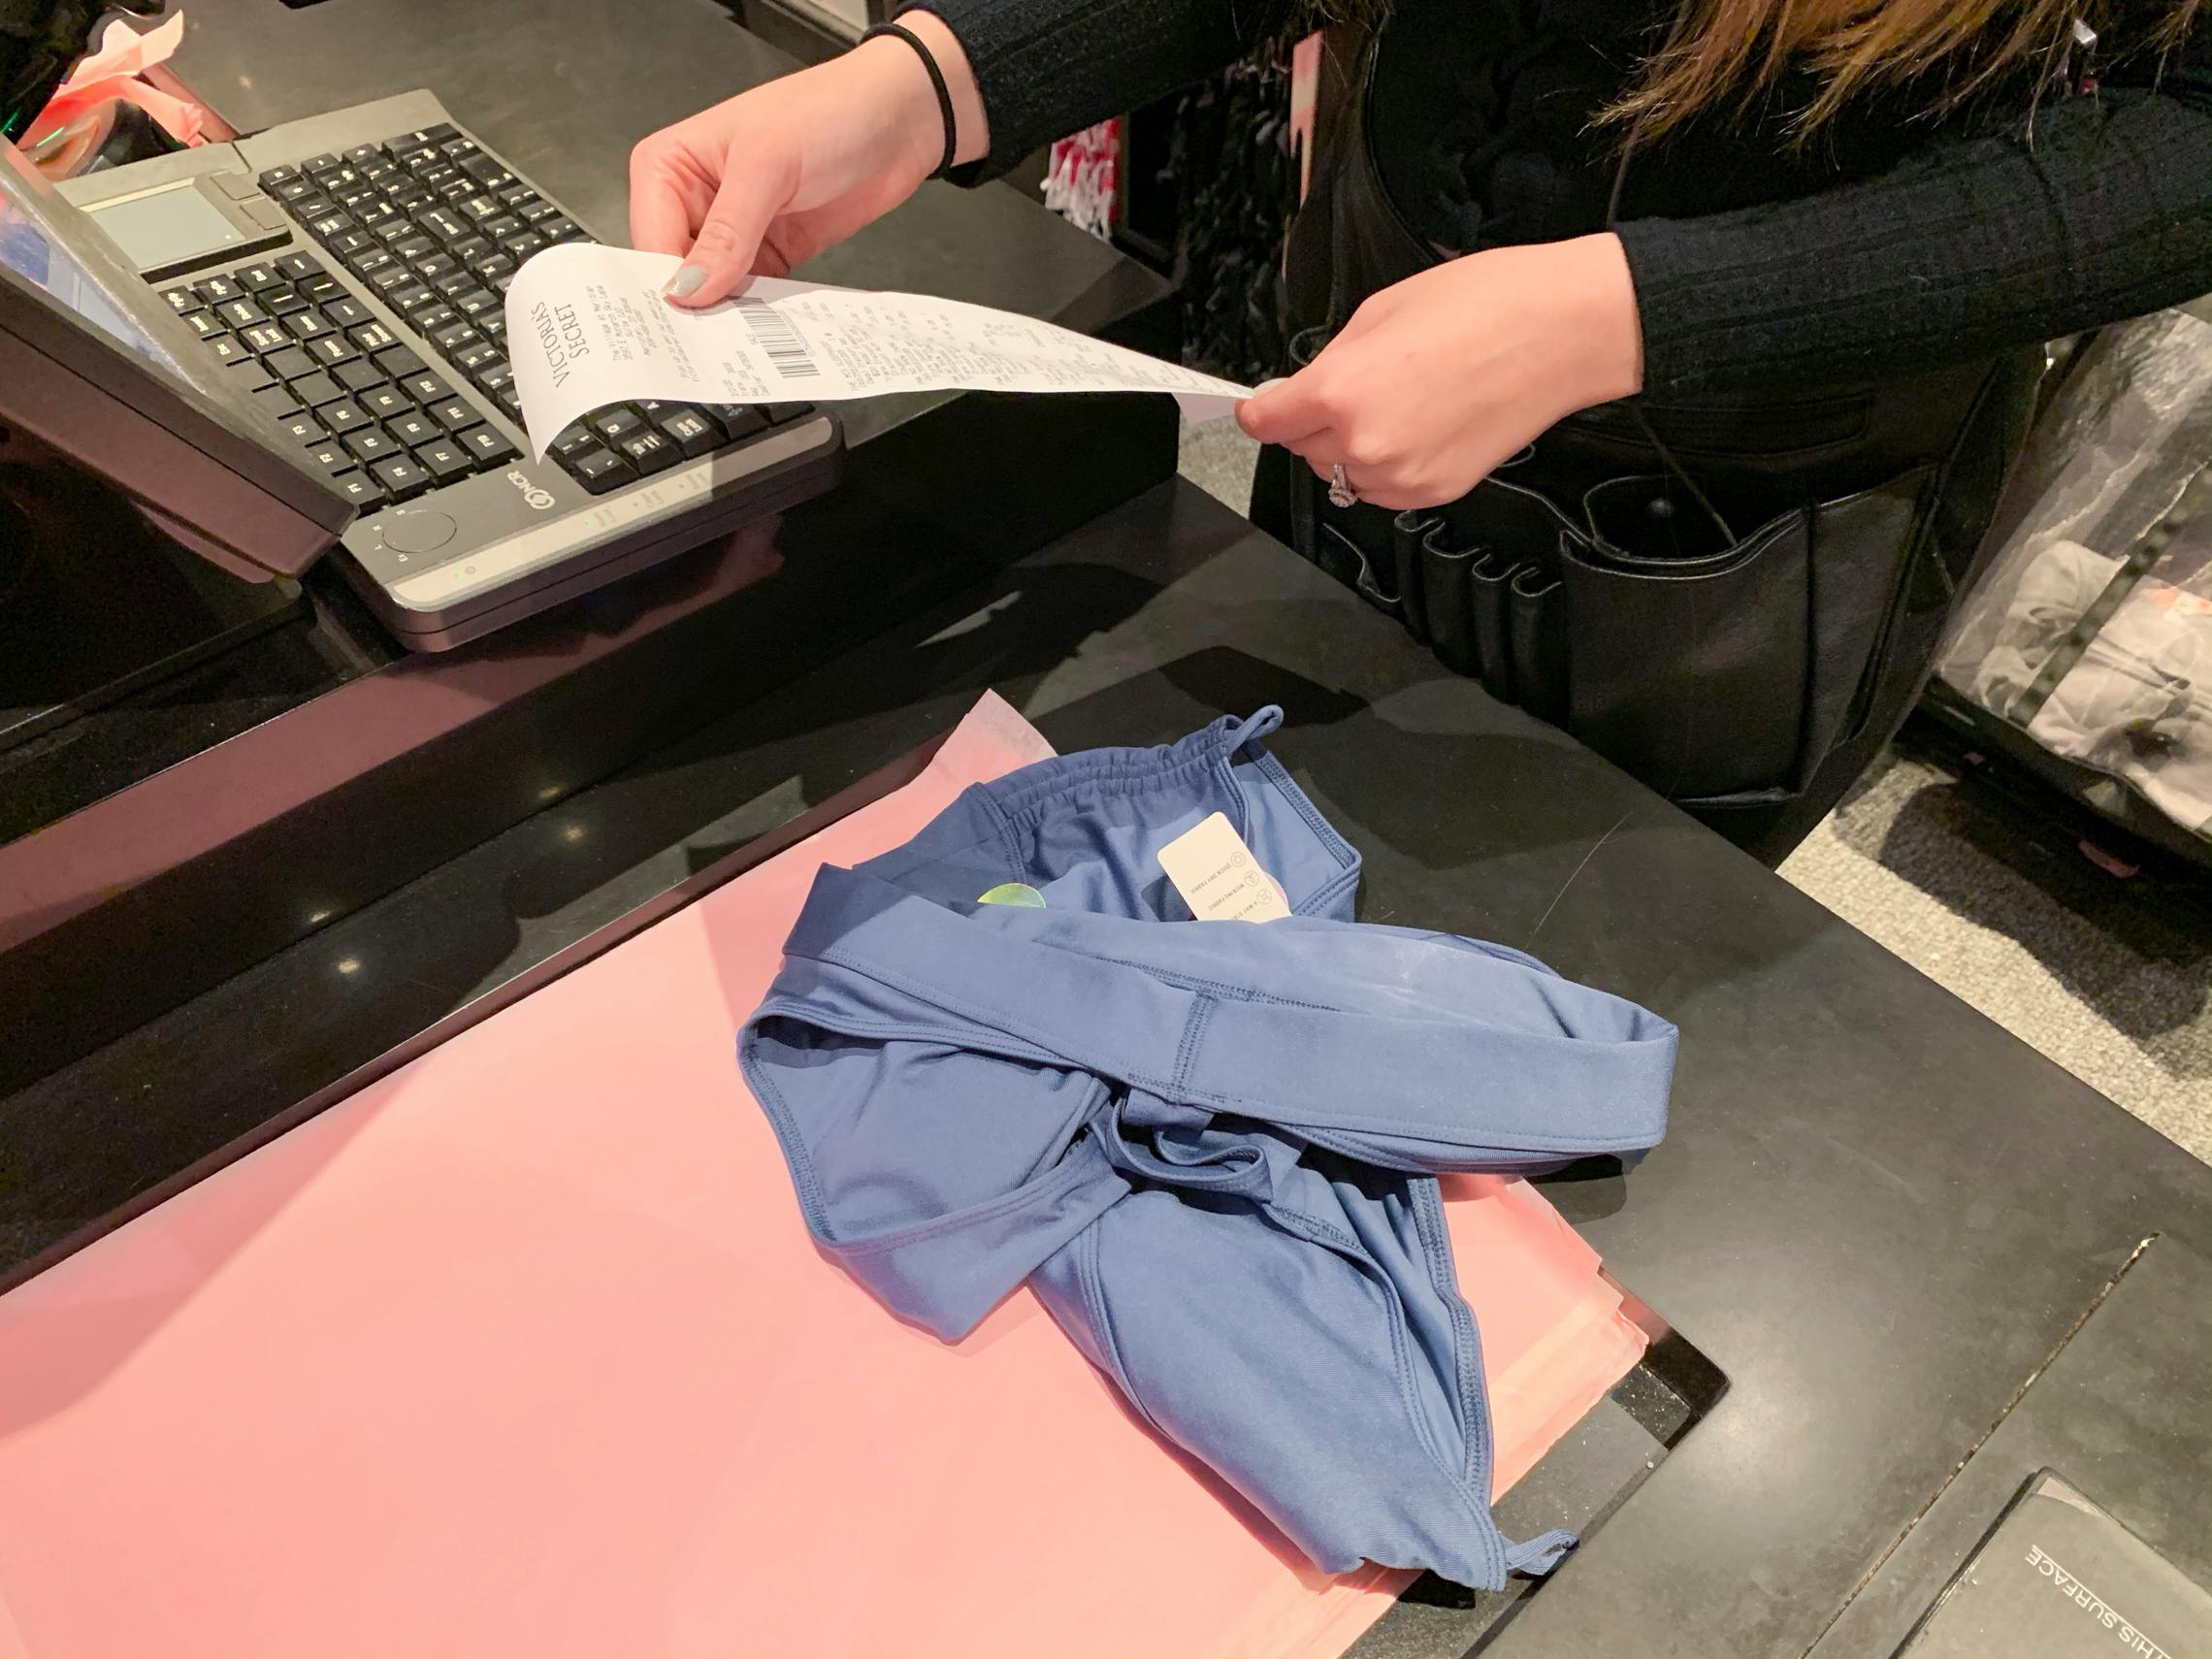 Female employee looking at a receipt to return an item at the register.